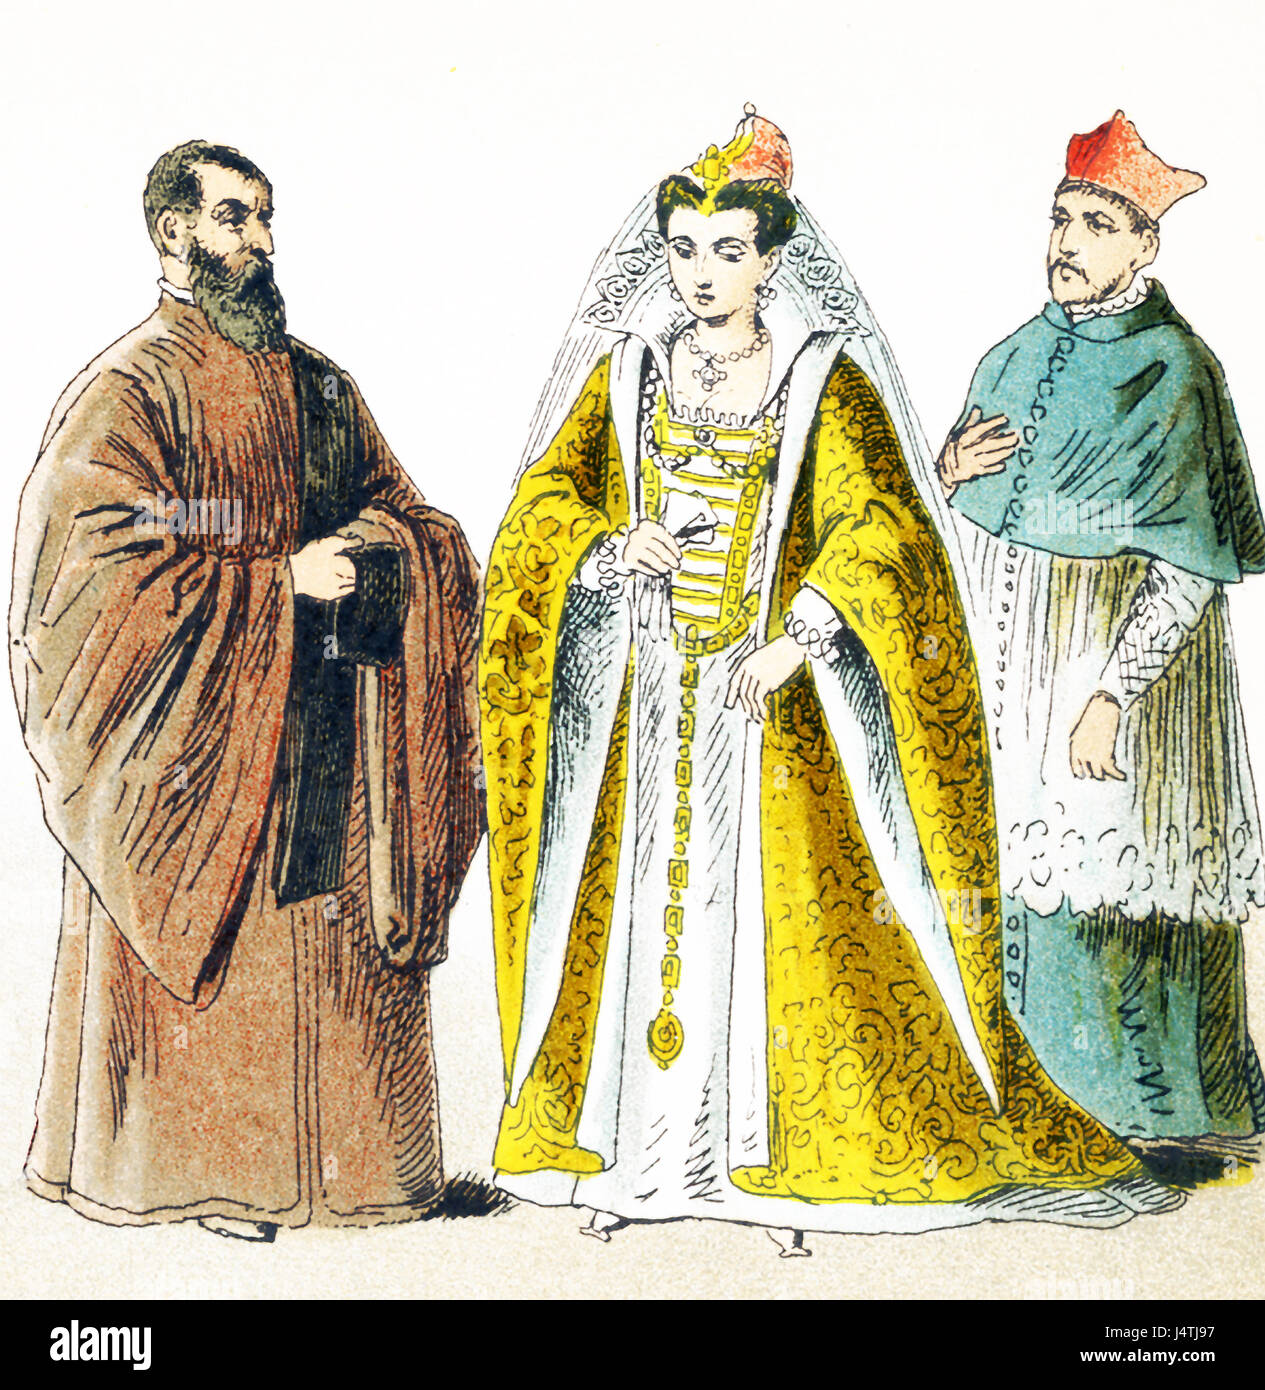 The figures pictured here represent Italians around 1500 A.D. They are from left to right: procurator of St. Mark, wife of the Doge, cardinal in house dress. The illustration dates to 1882. Stock Photo